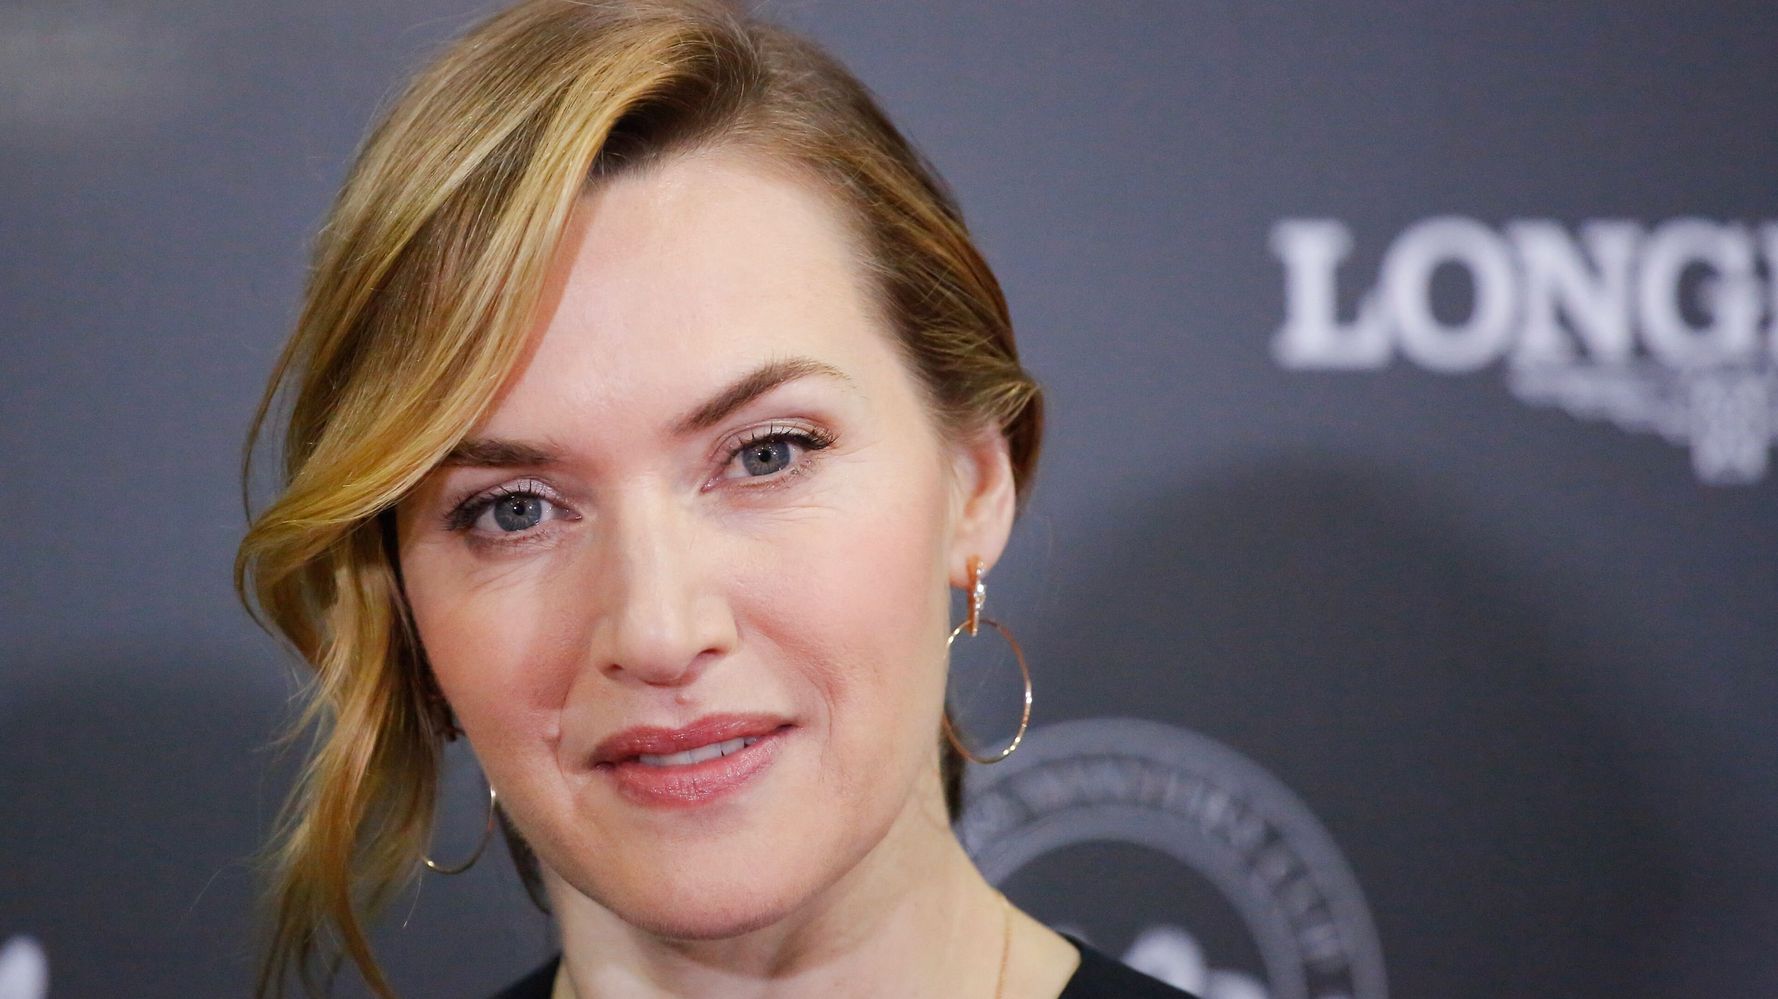 Kate Winslet Describes Being Awestruck By 'Mythical' Wawa